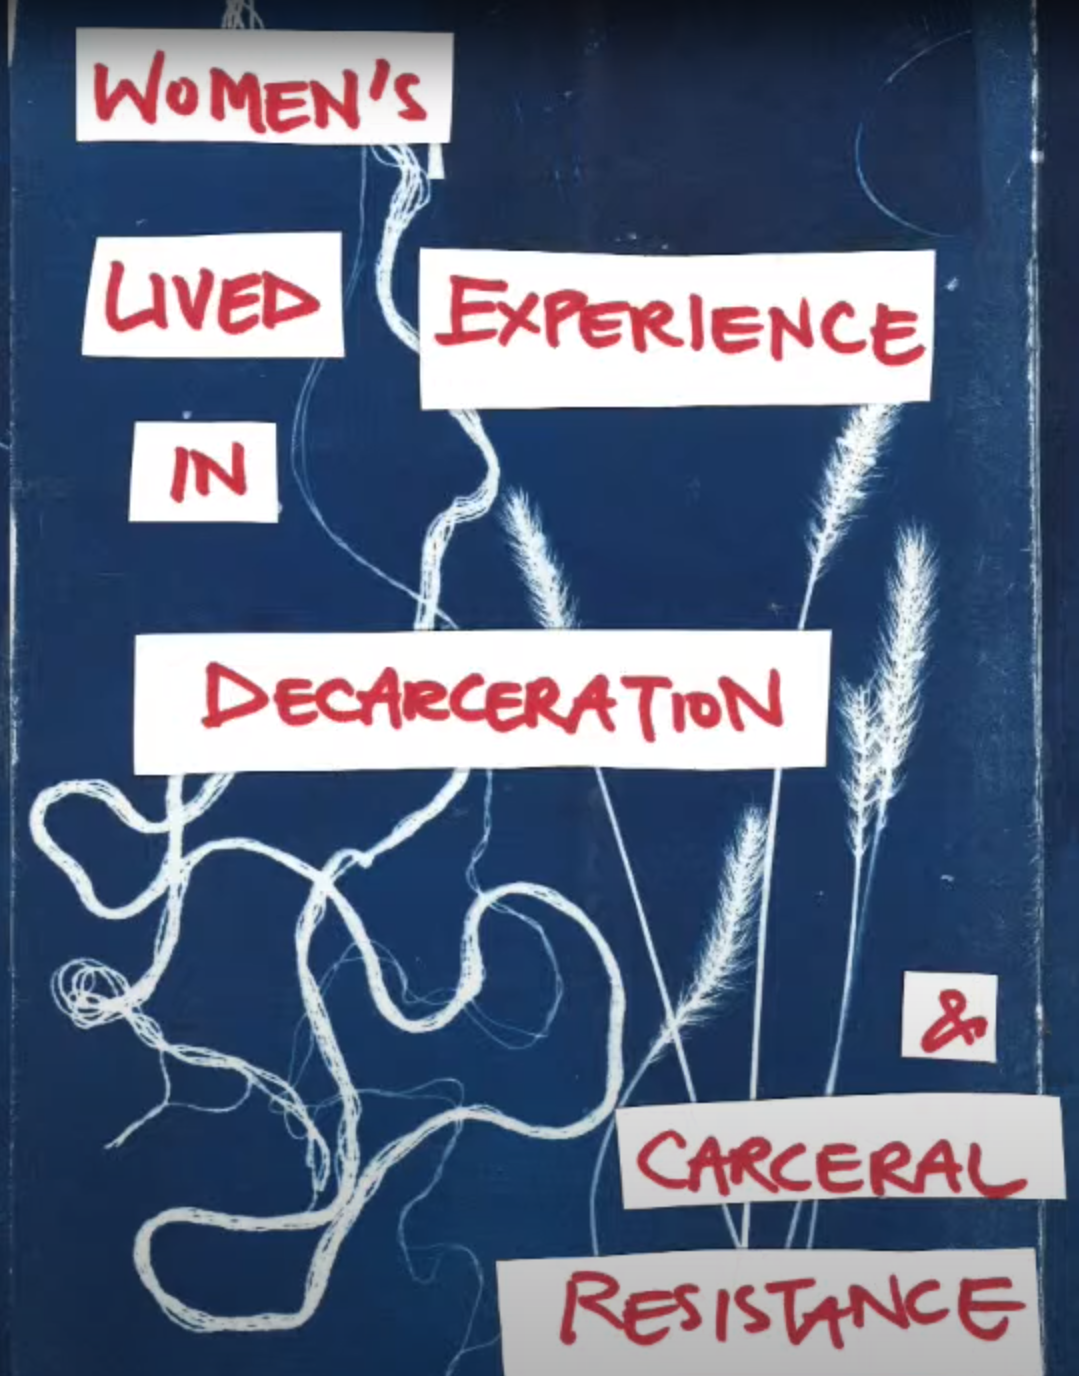 Women's Lived Experience in Decarceration & Carceral Resistance